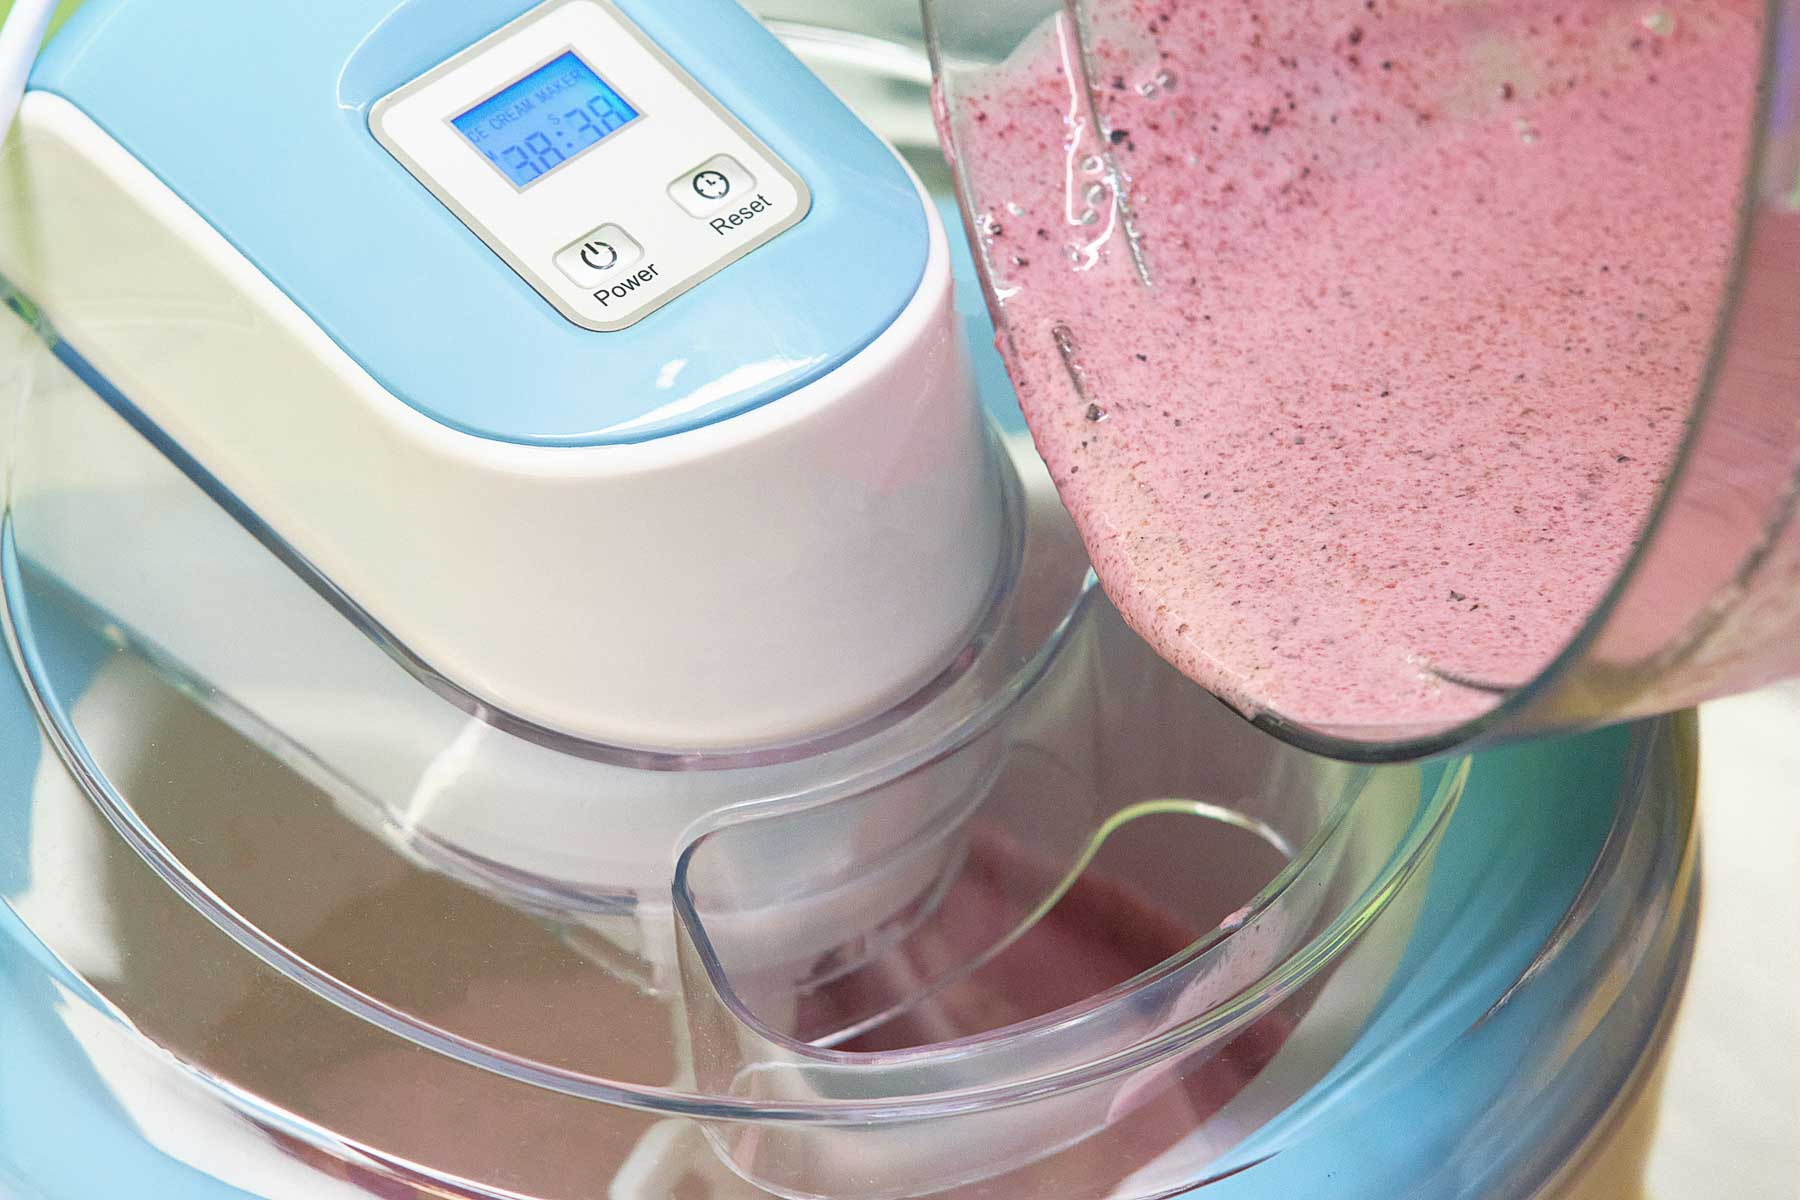 Pouring blueberry sorbet into an ice cream maker.